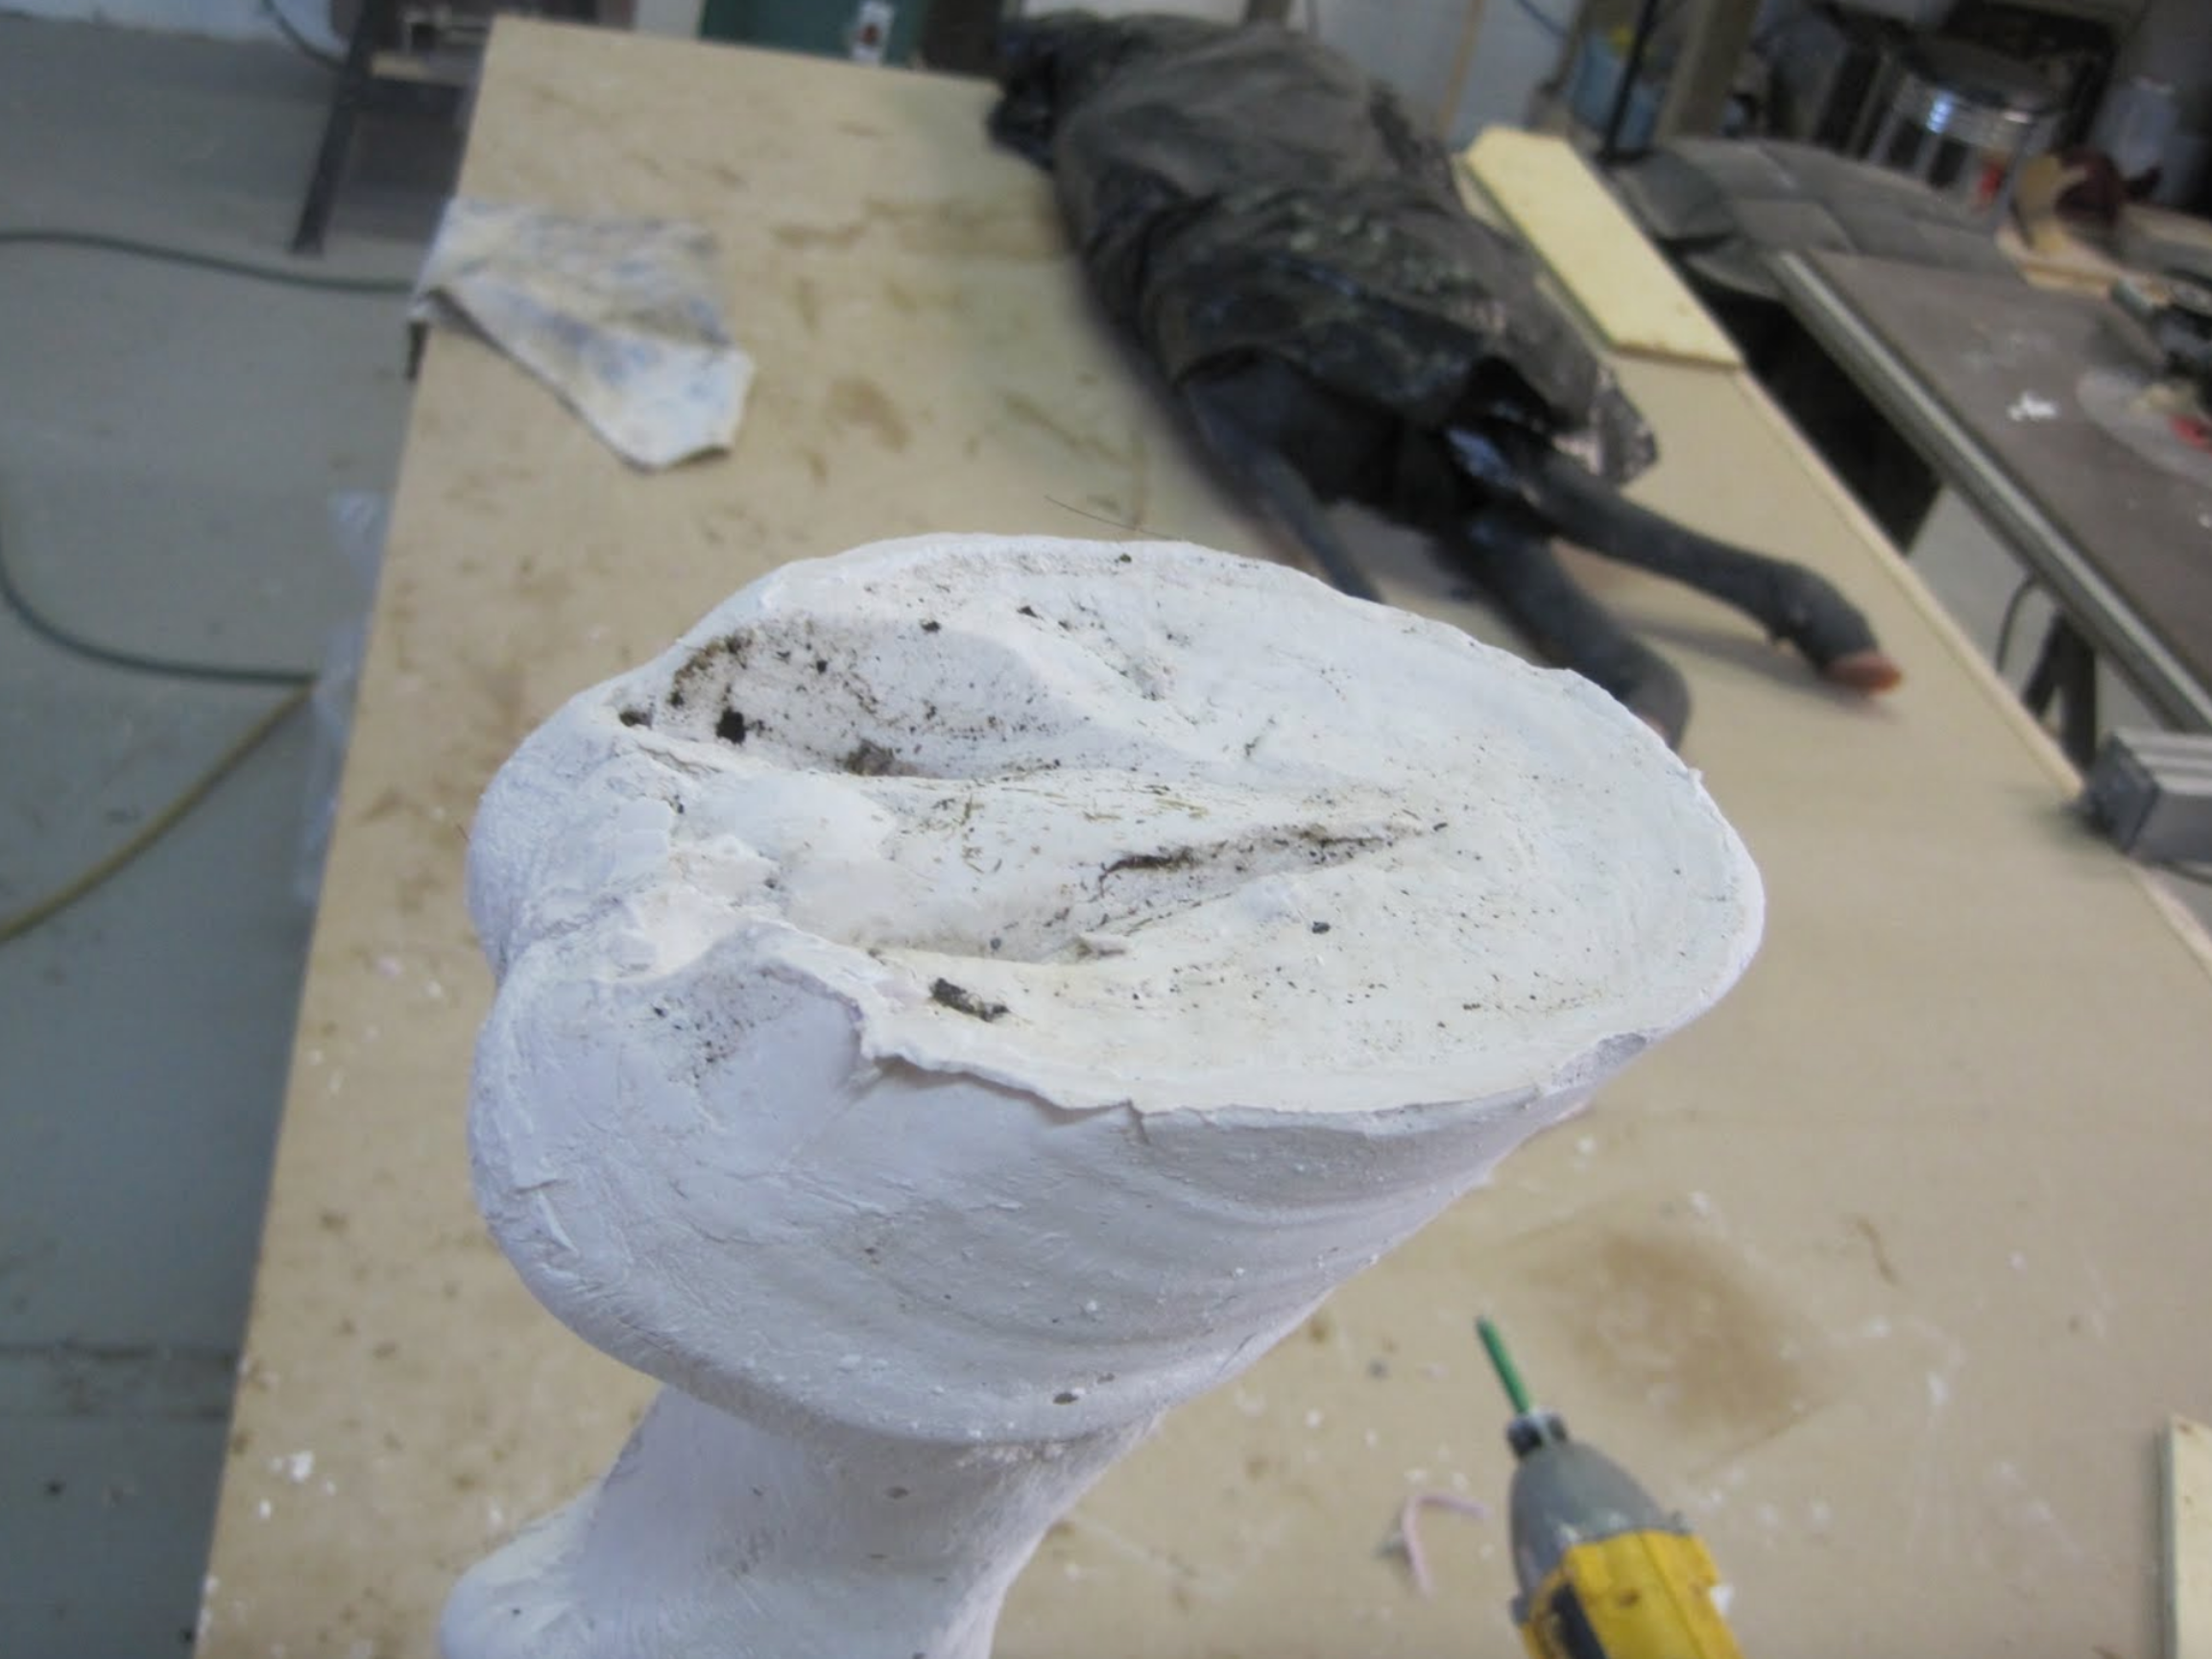  The plaster cast has captured all the detail of the hoof, but still requires a small amount of clean-up. 